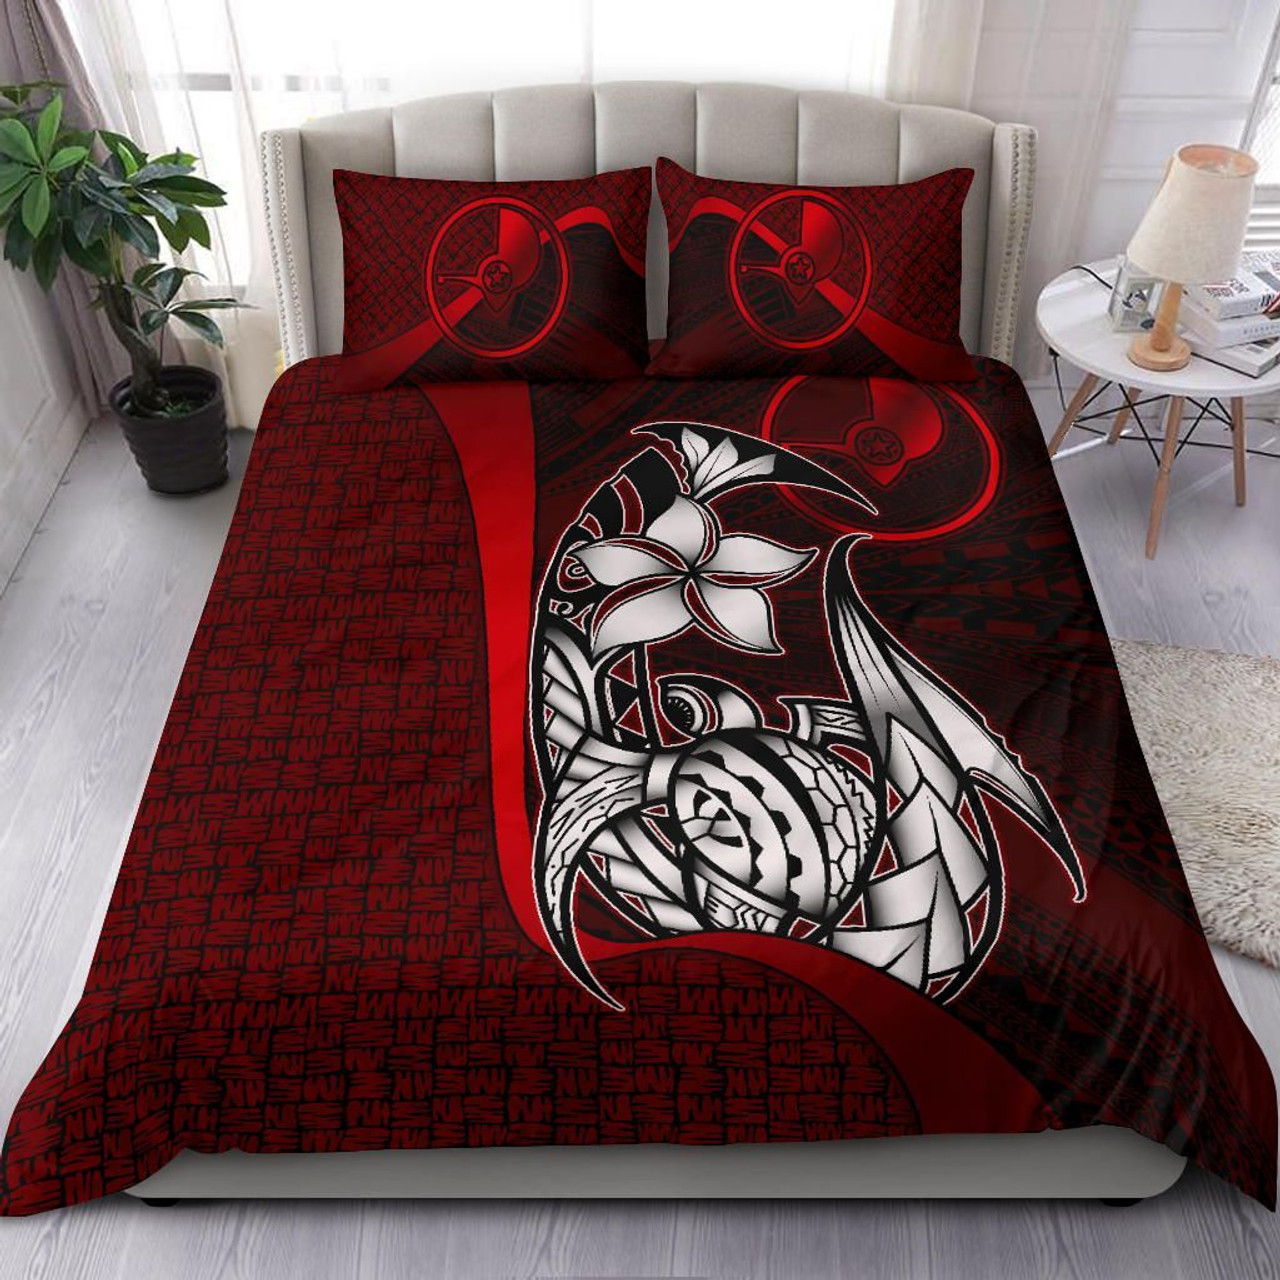 Yap Micronesian Bedding Set Red - Turtle With Hook 1